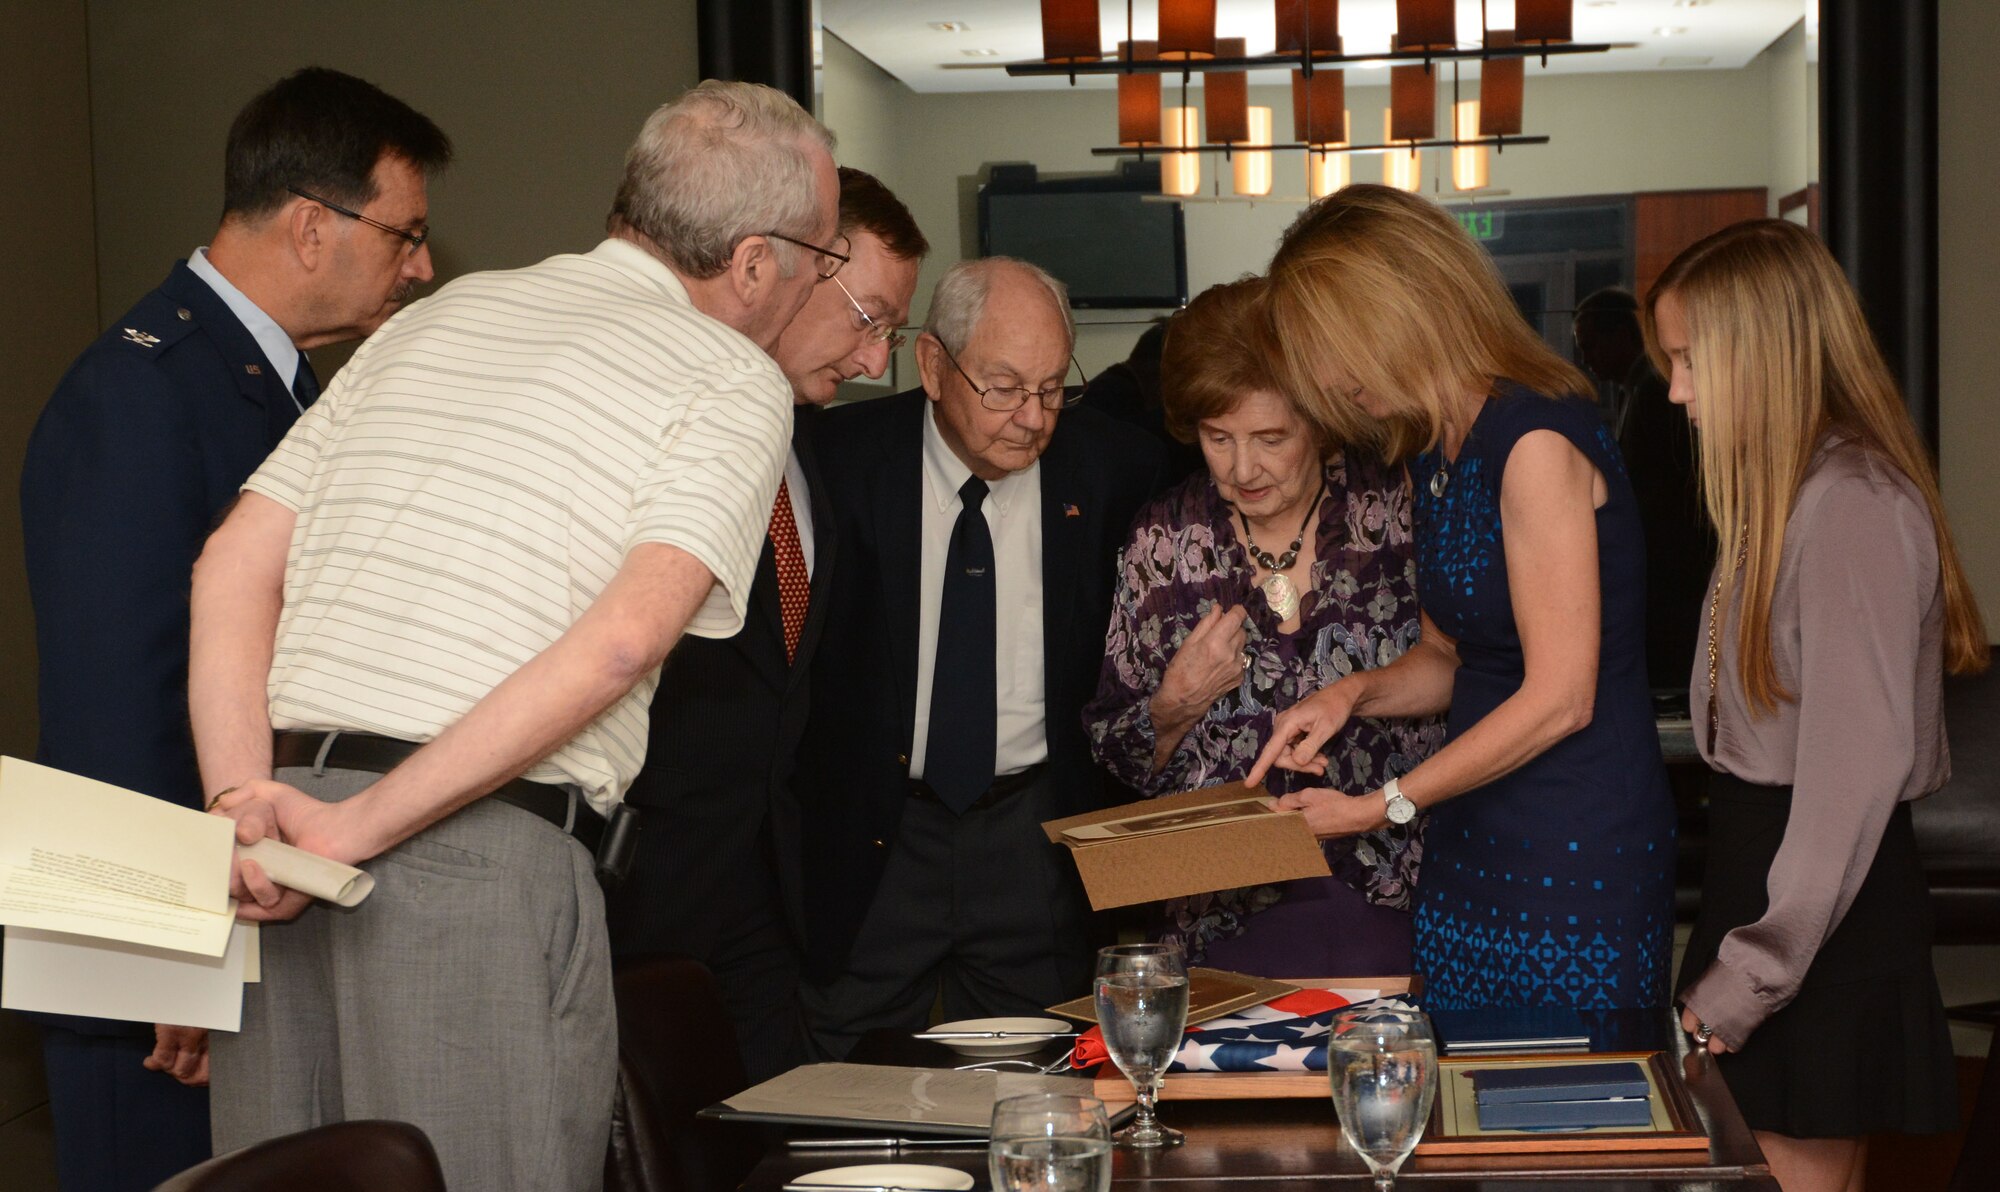 Helaine Blizzard, second cousin of Capt. John Perrin, second from right, shows a momento to the presentation attendees June 26, 2014, in Dallas. Perrin steered his failing aircraft away from the populated areas of Stafford and Creswell, England, resulting in the loss of his life. (Photo by Staff Sgt. Samantha Mathison)